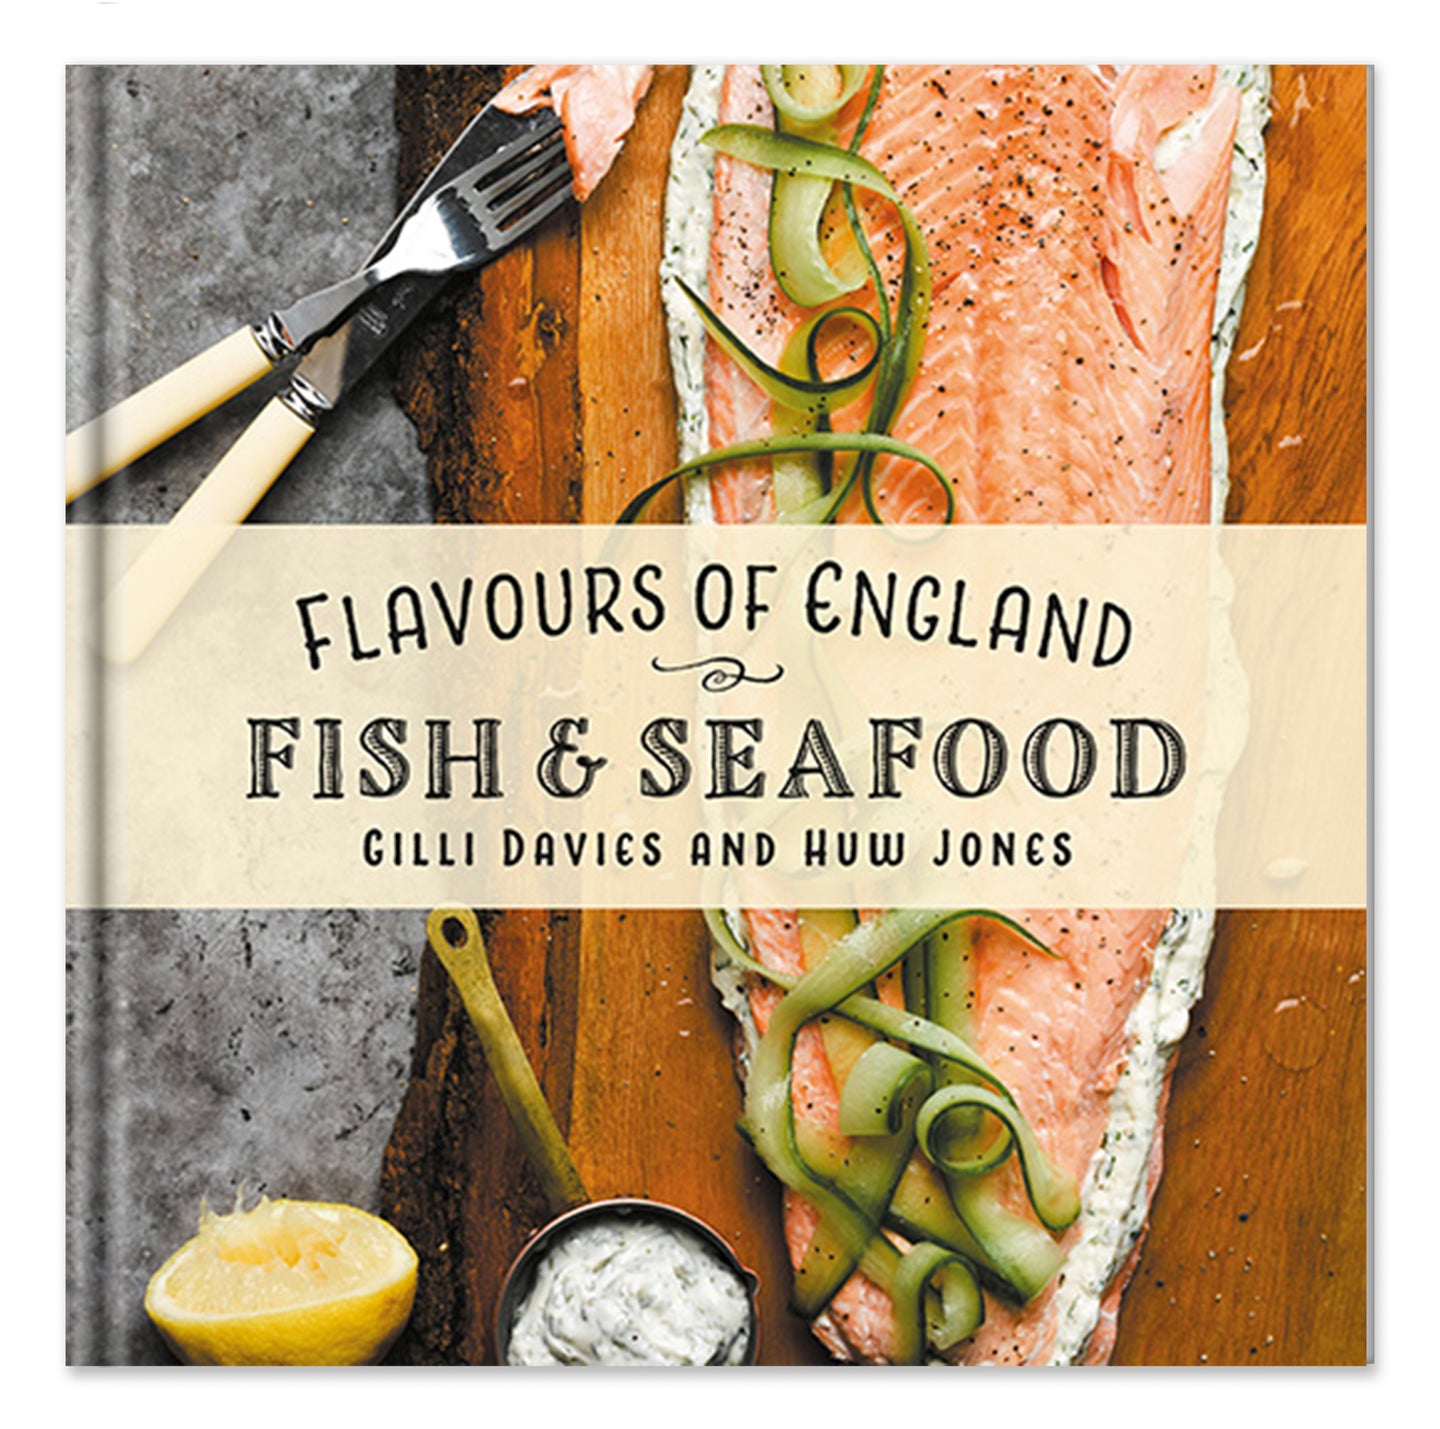 Flavours of England: Fish & Seafood